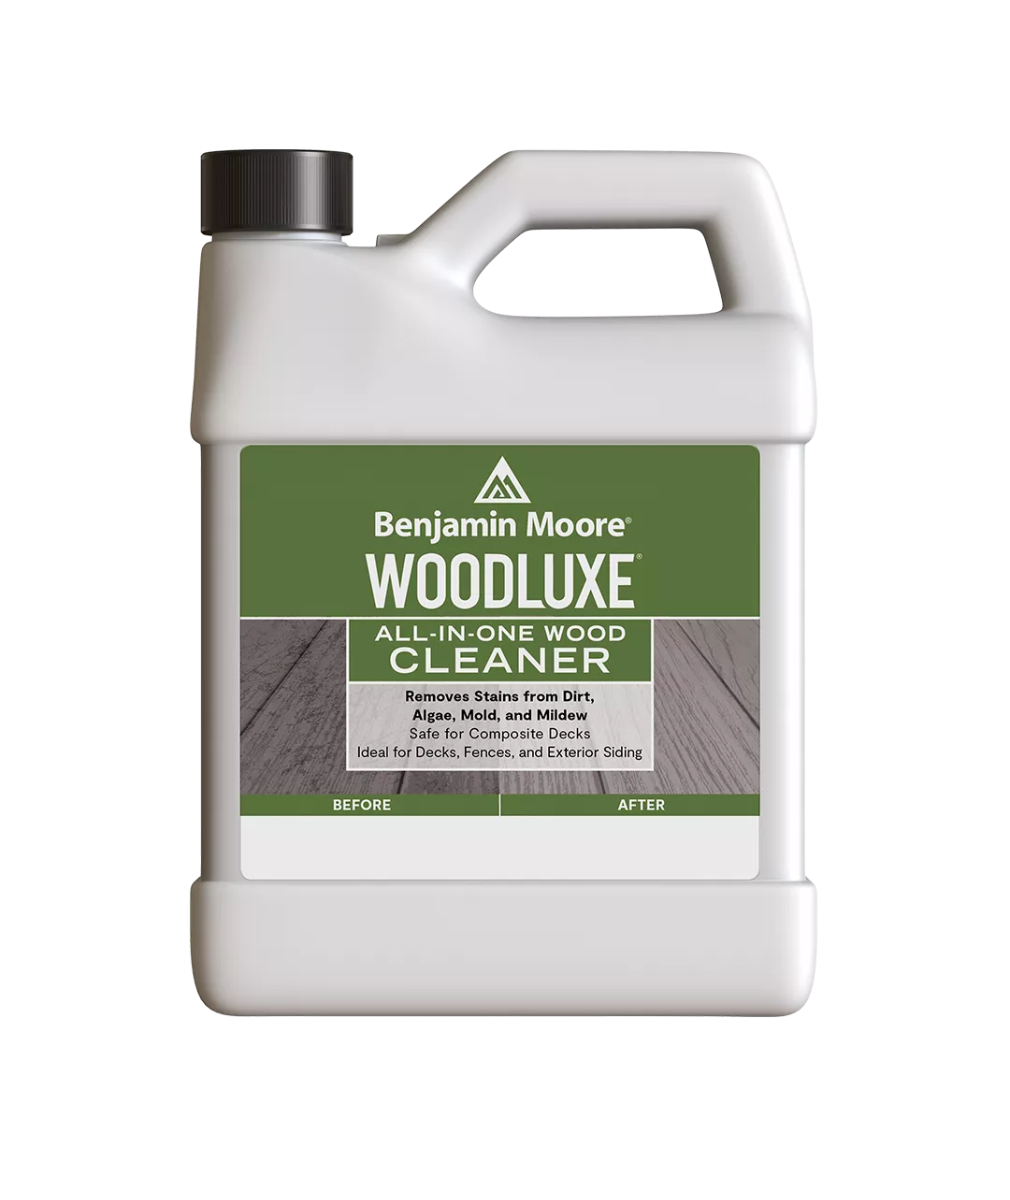 Benjamin Moore Woodluxe Wood Cleaner Gallon available at JC Licht.